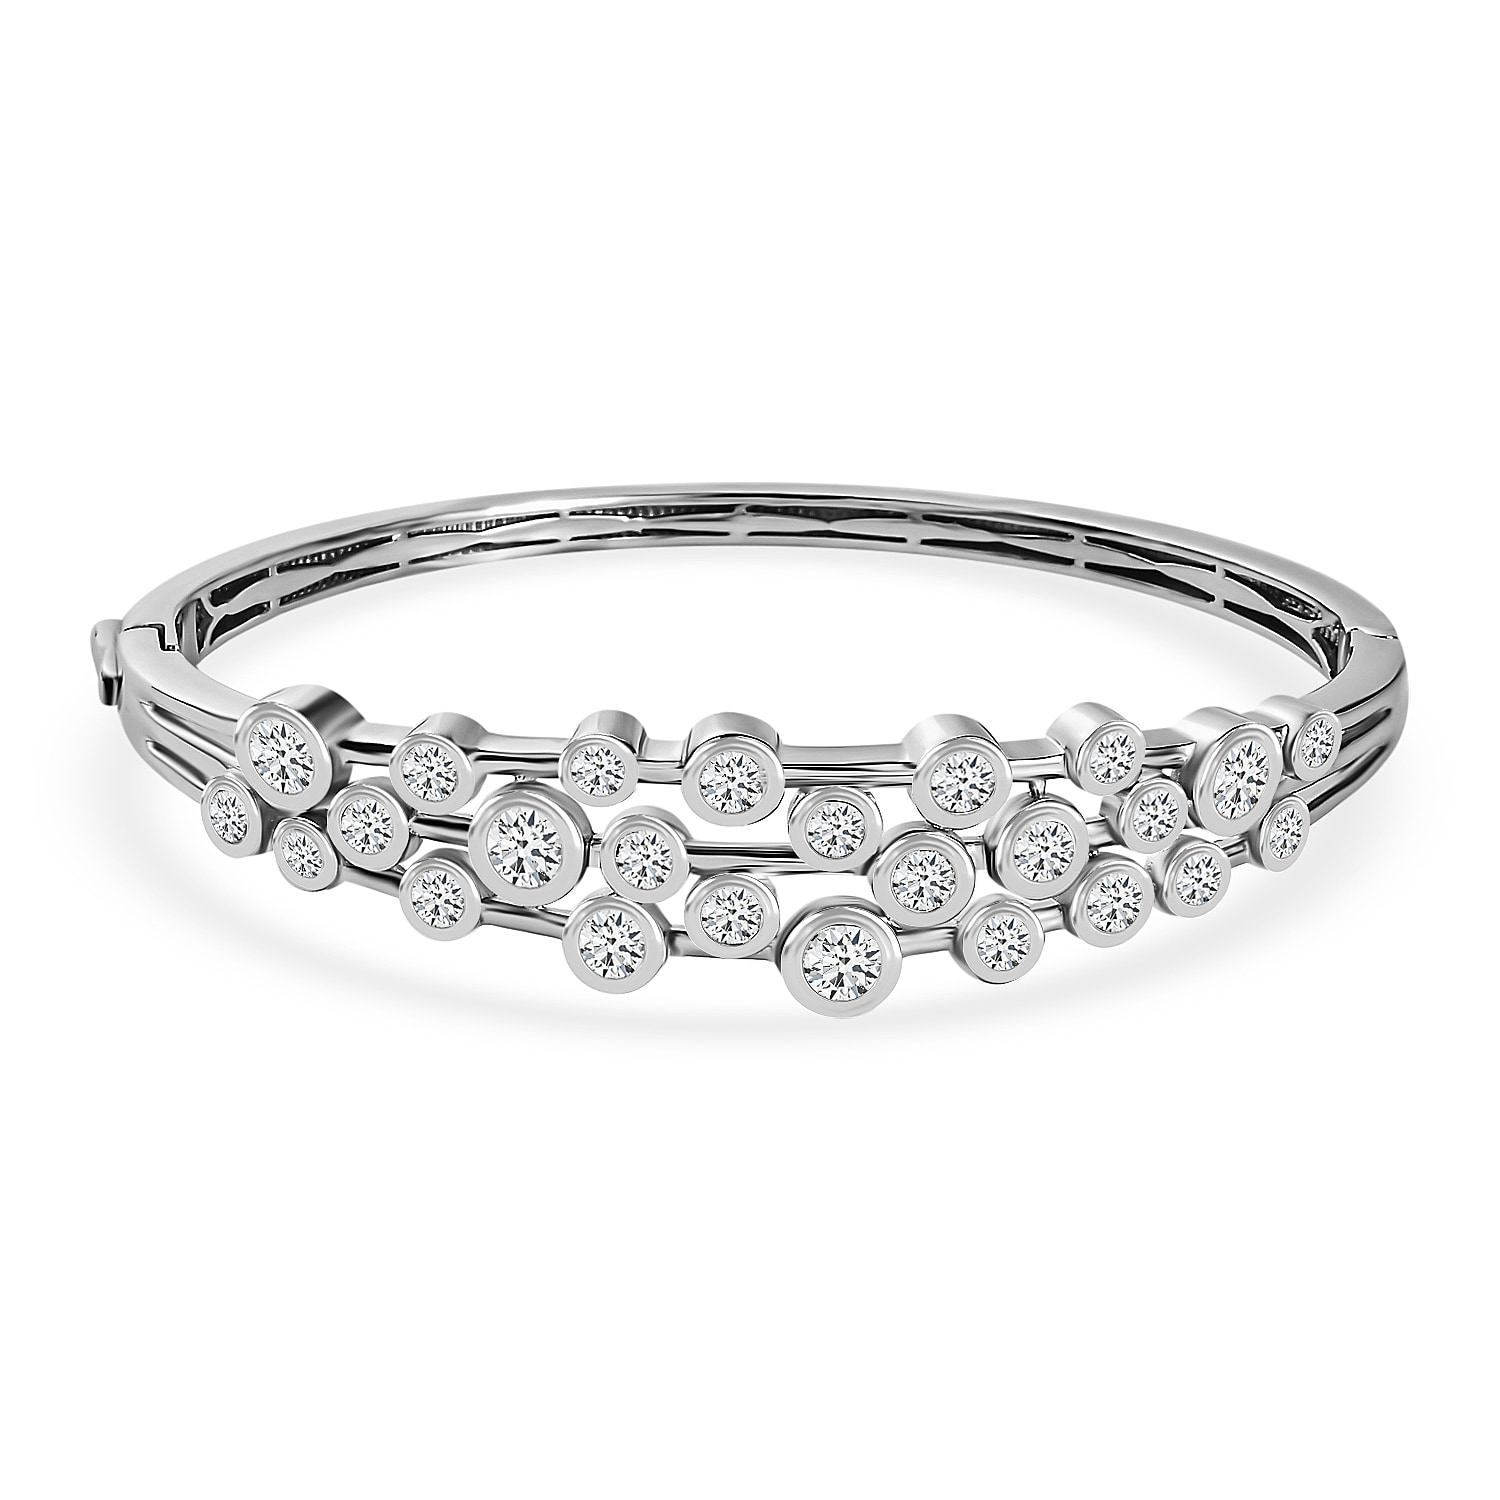 Moissanite Bubble Bangle (Size 7.5) in Platinum Overlay Sterling Silver 5.17 Ct, Silver Wt. 19.60 Gms